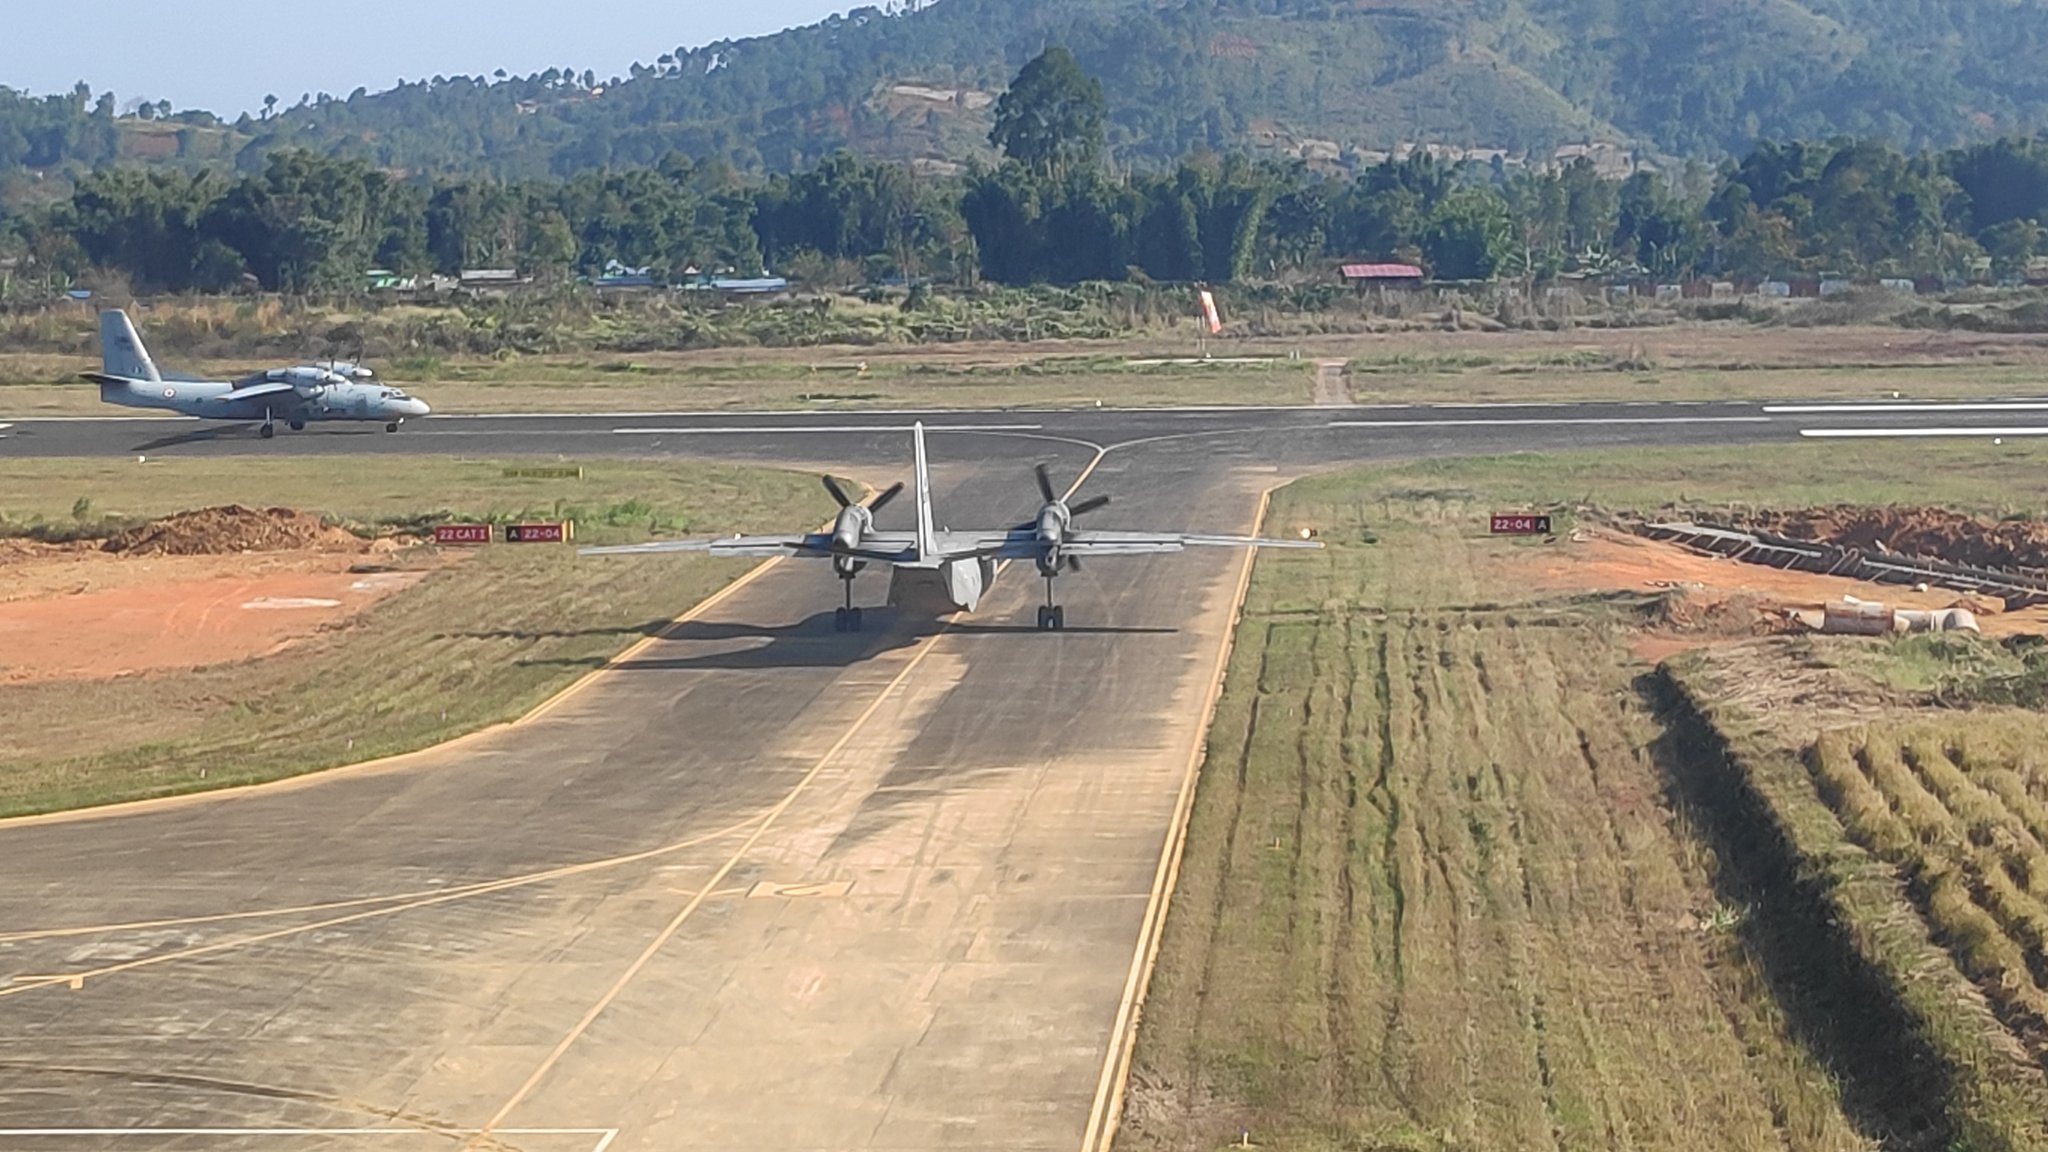 AAI Shillong Airport on X: "T-520 Though no regular flight at present, #AAI's #ShillongAirport is ready to cater any flight operations. Today, 02 IAF @IAF_MCC aircrafts carried out training flights.. With the